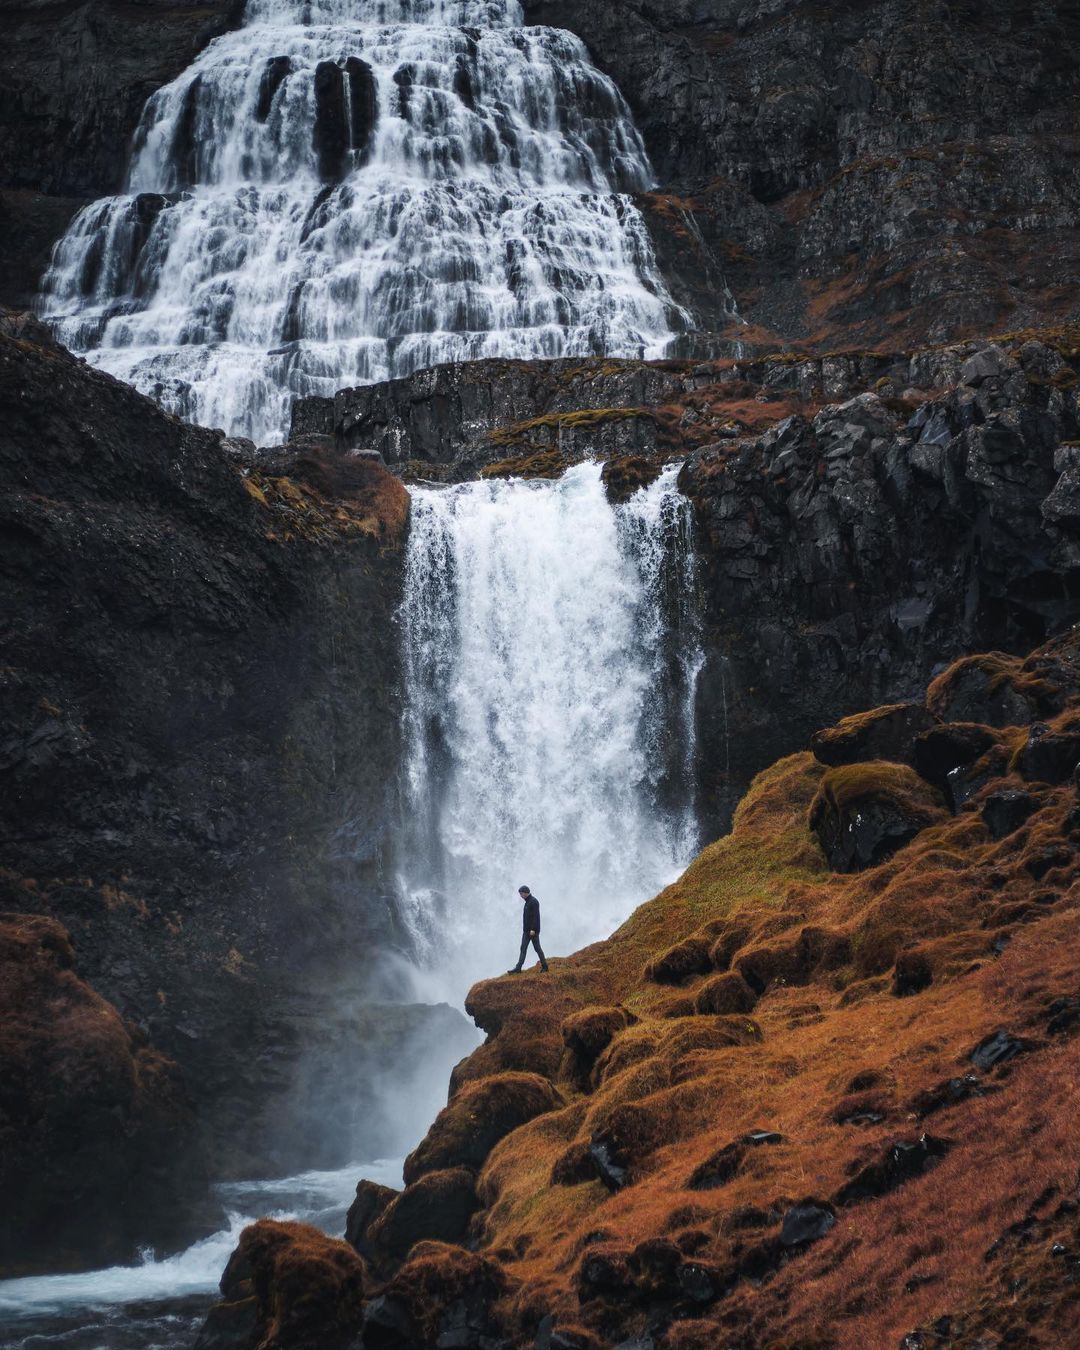 One of the most spectacular waterfalls in Iceland and the largest in the Westfjords